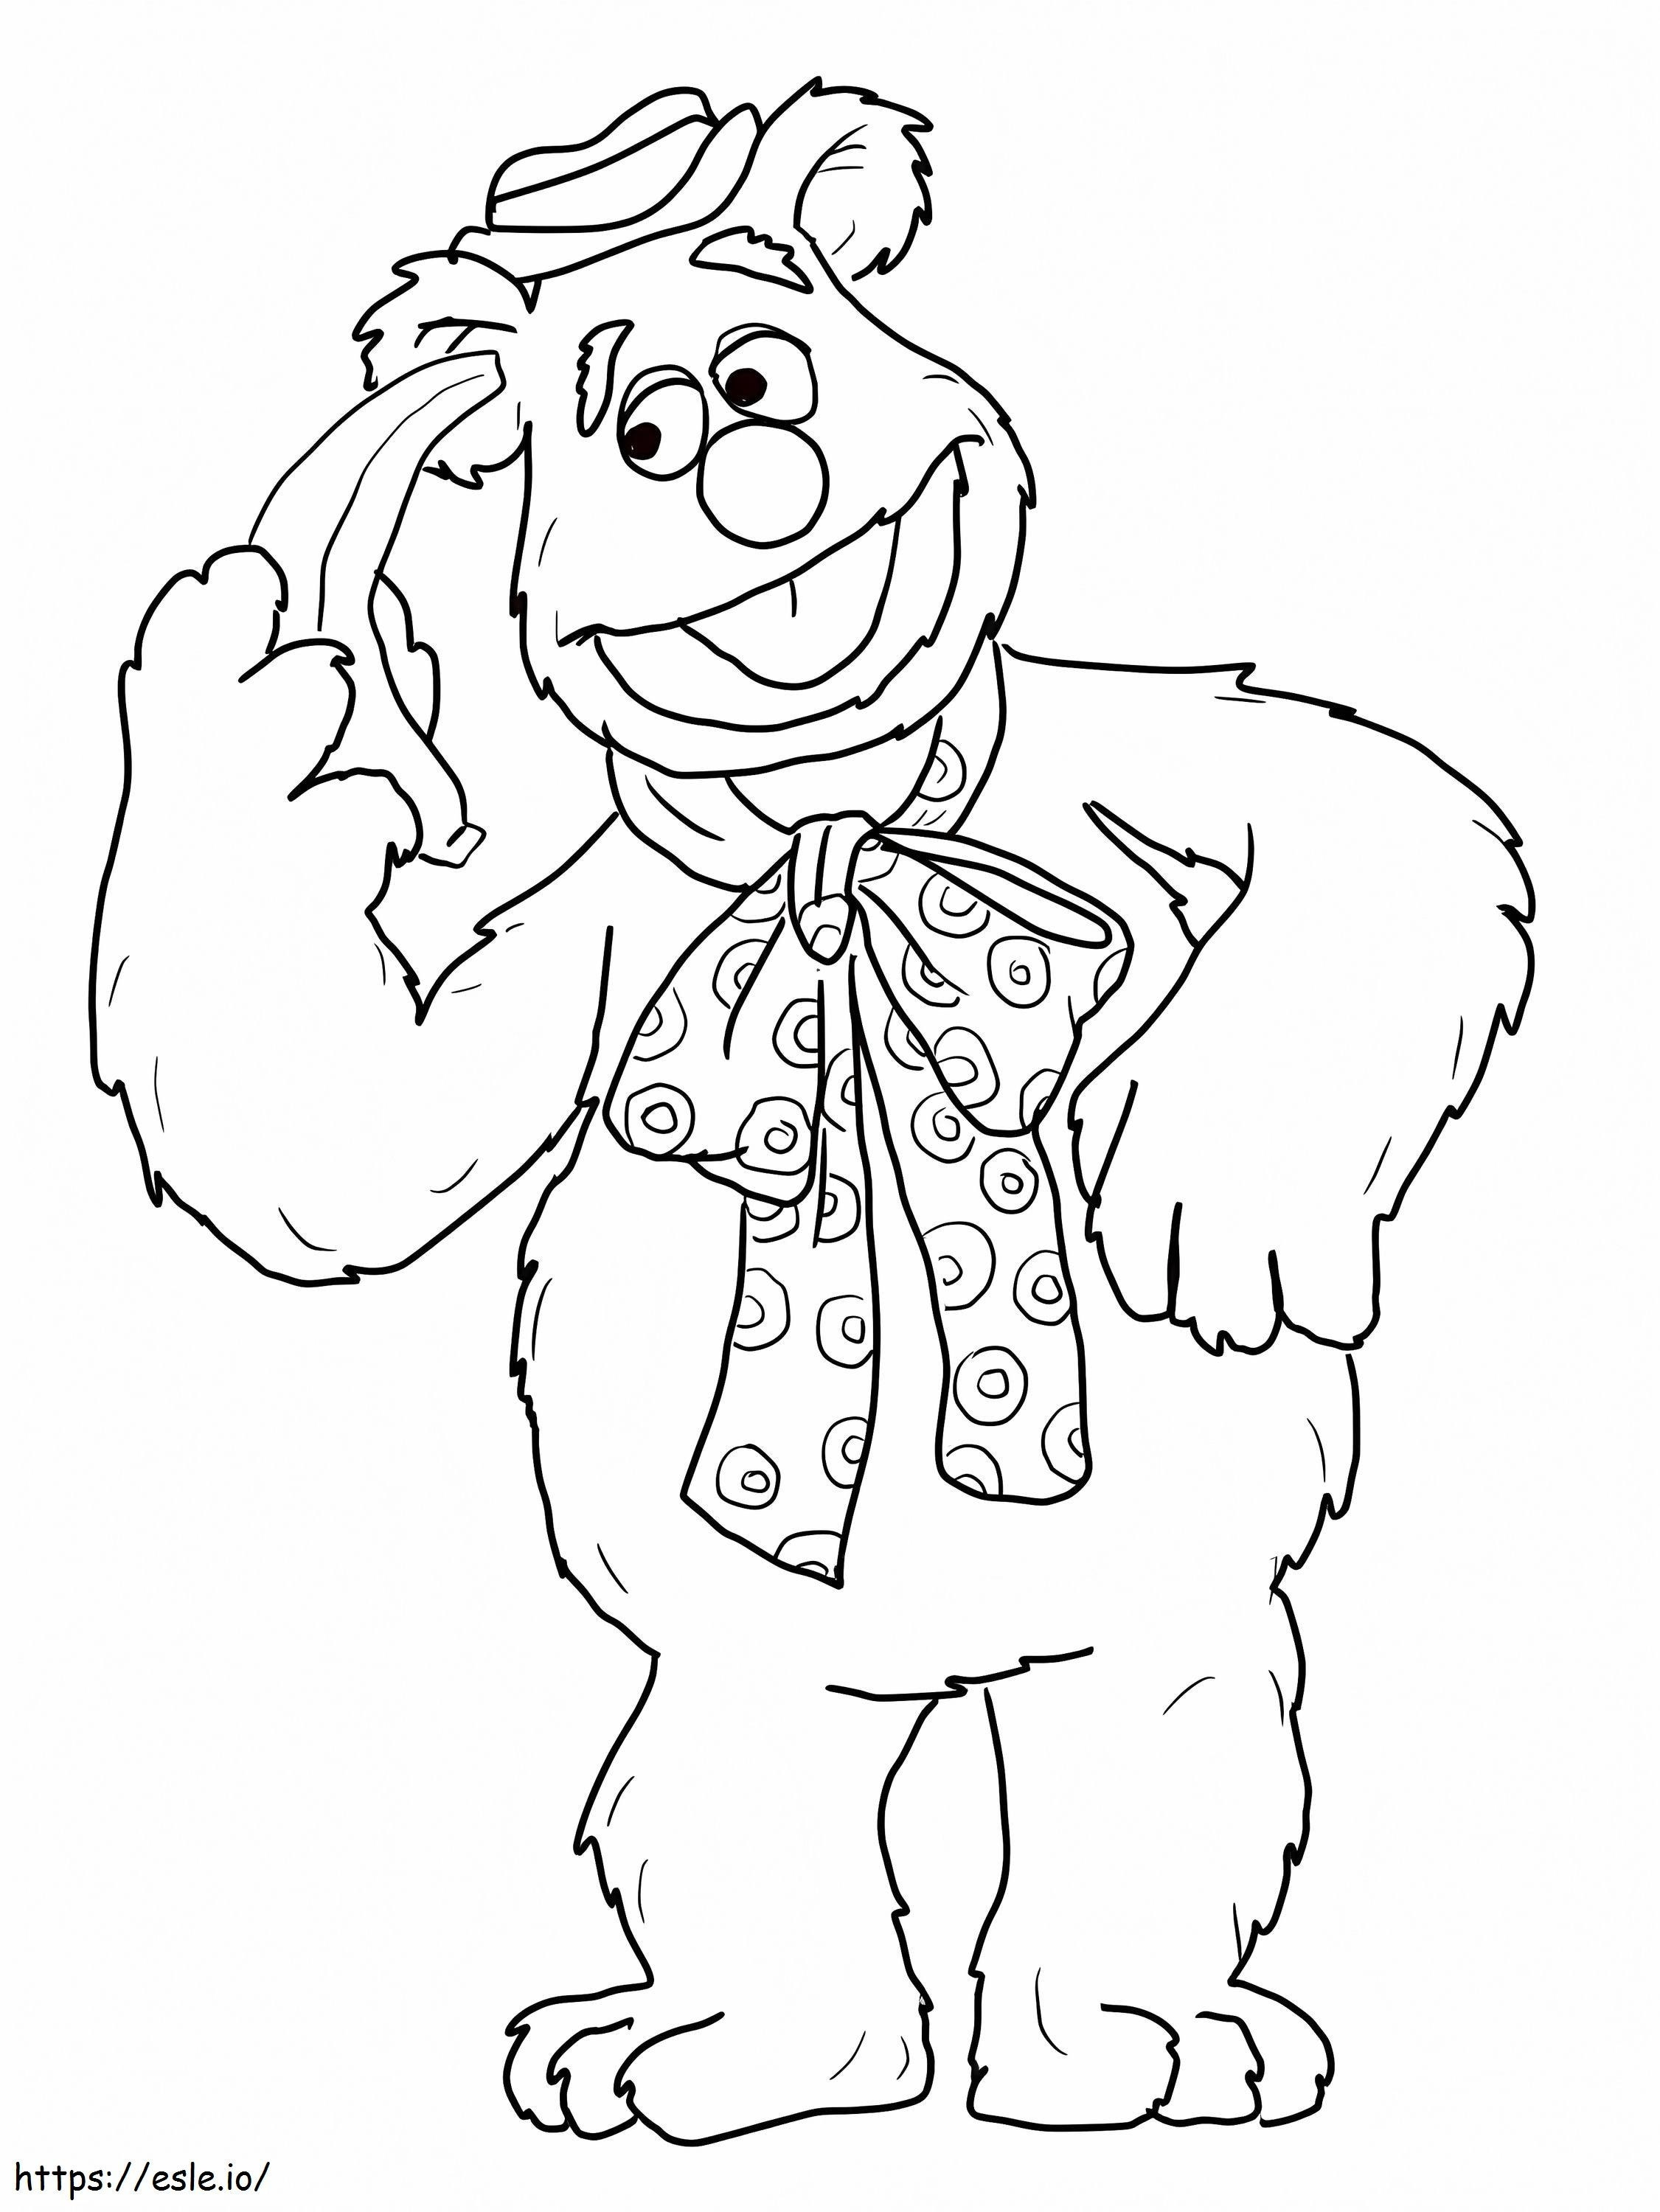 Fozzie Bear With Banana coloring page